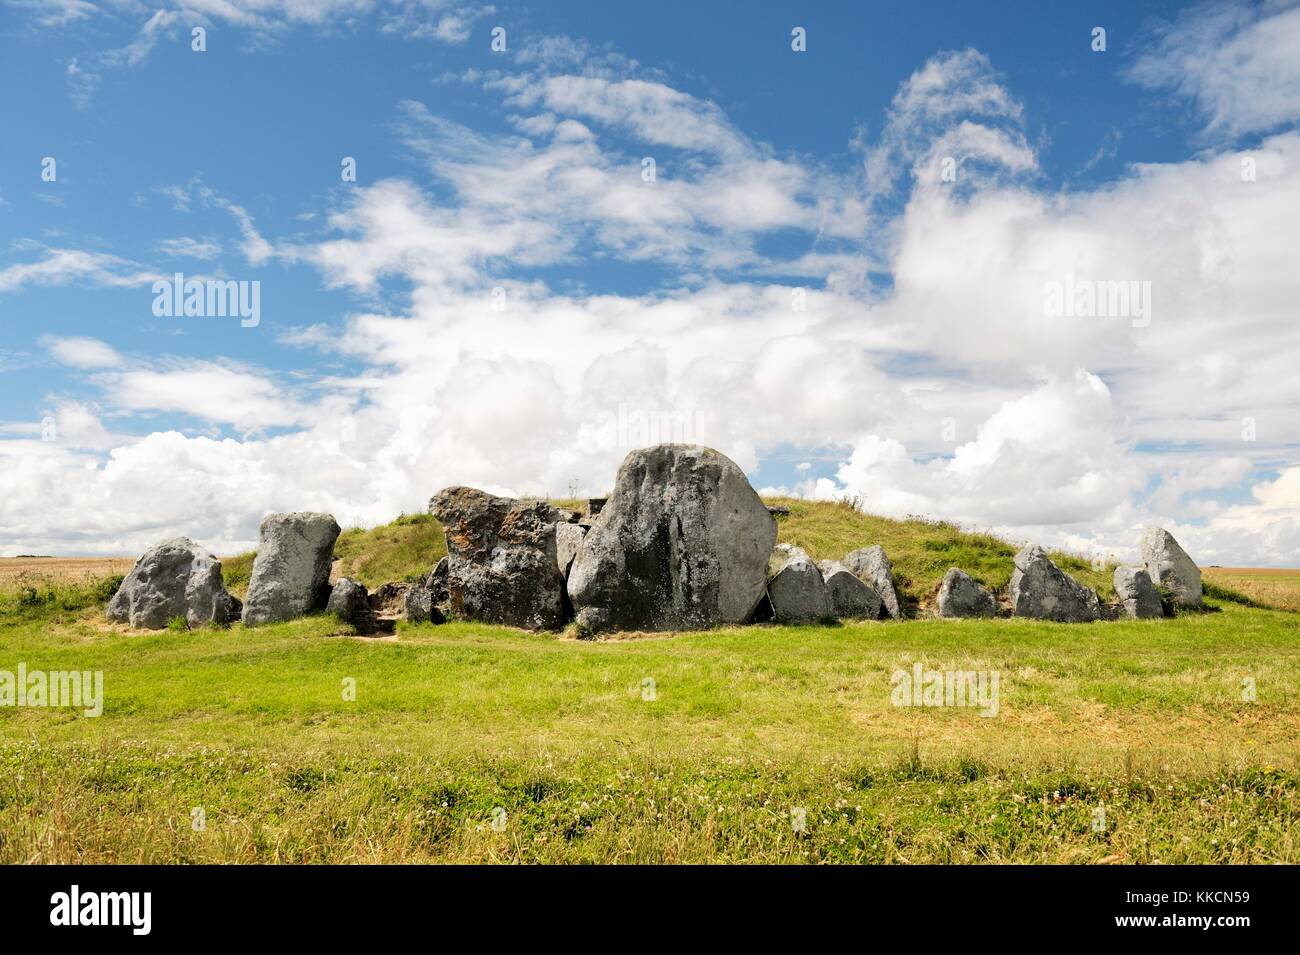 West Kennet Long Barrow prehistoric Neolithic tomb near Avebury, Wiltshire, England. Stone façade of the Eastern front entrance Stock Photo